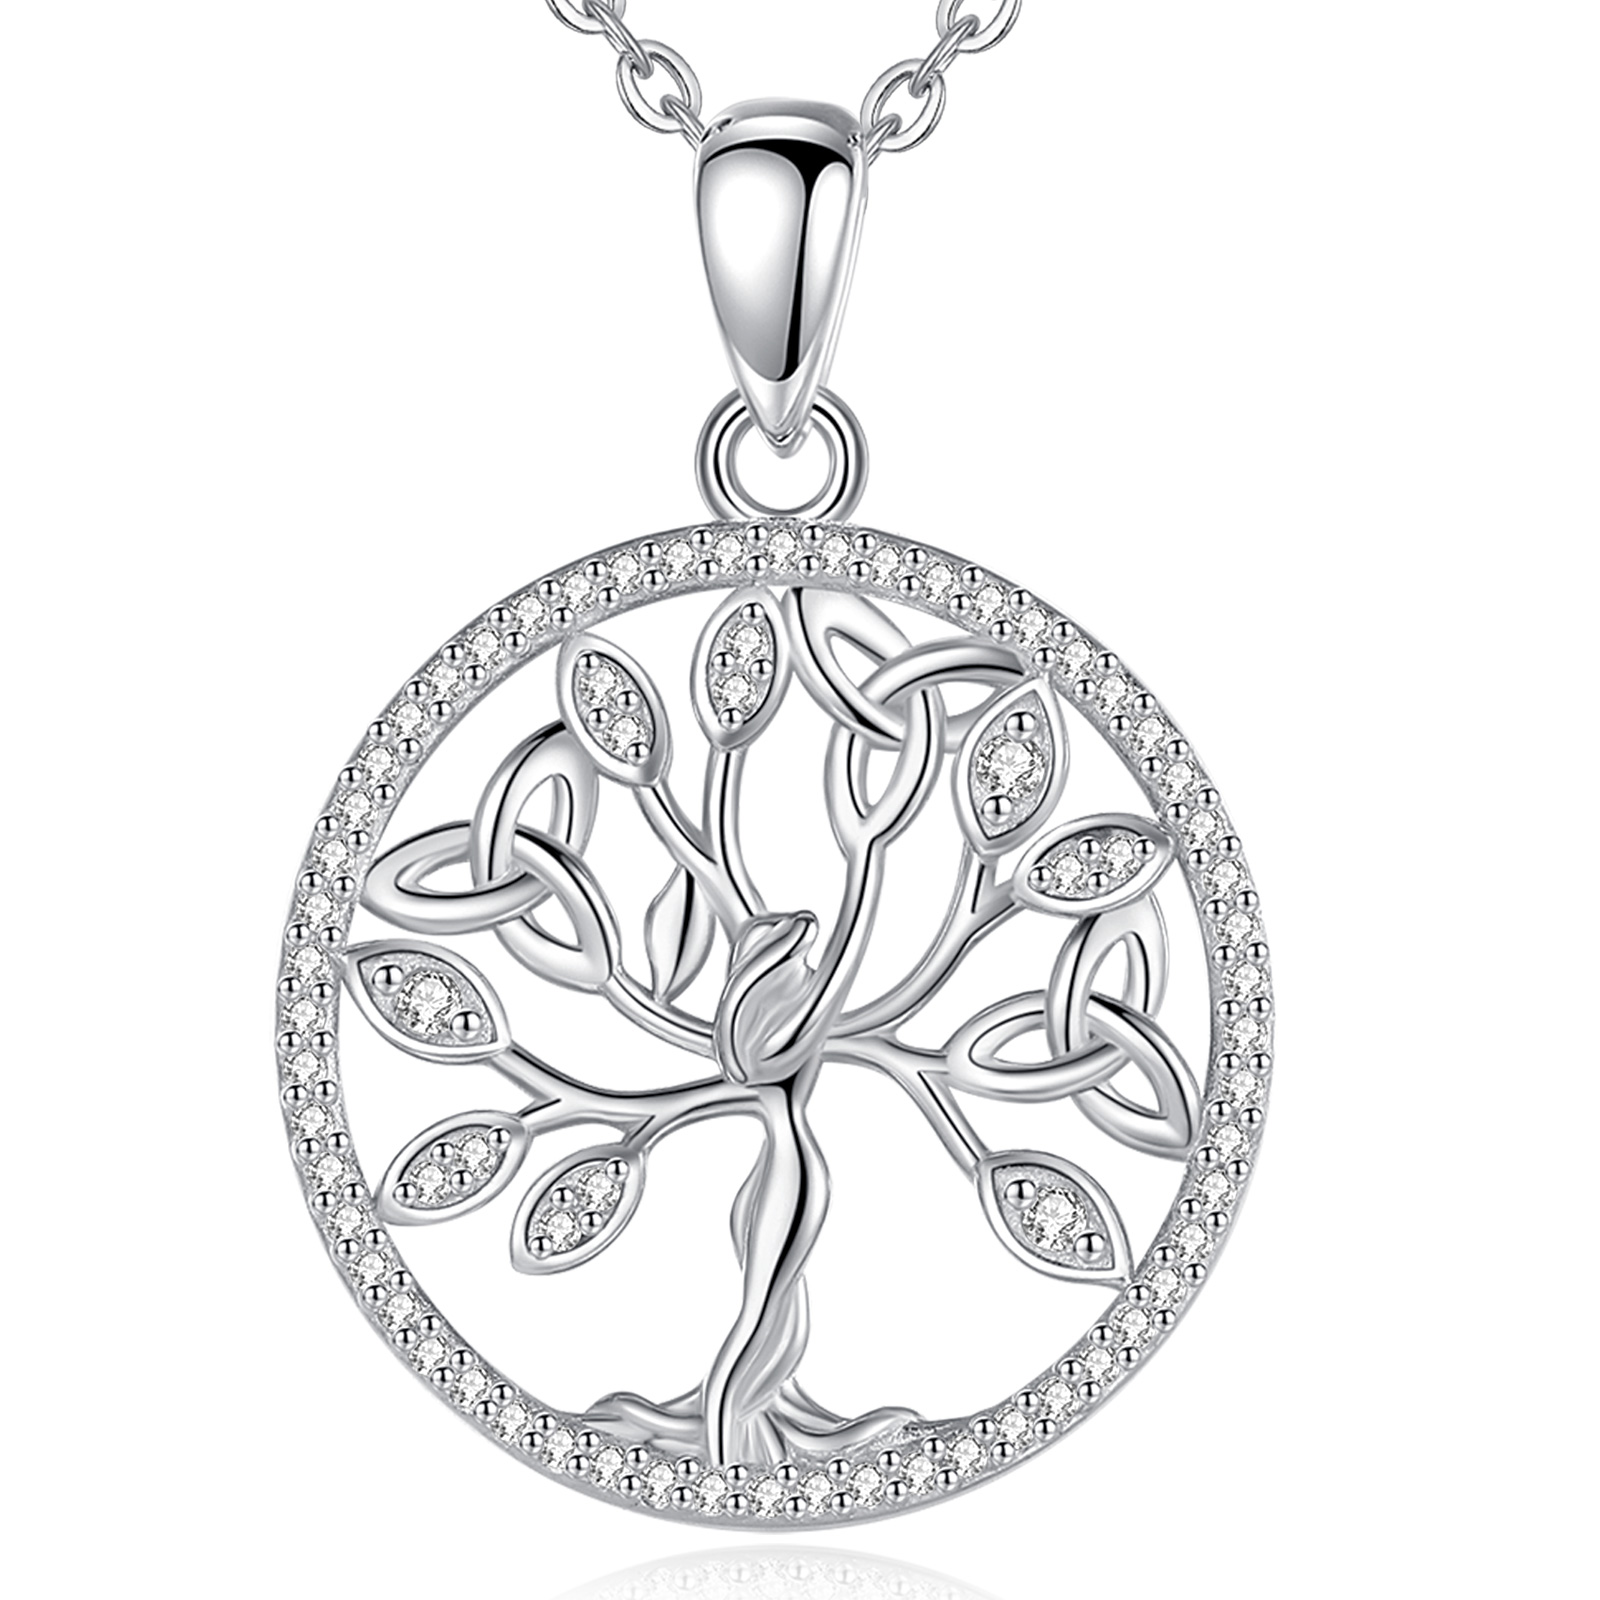 Merryshine 925 Sterling Silver Non Tarnish Tree of Life Necklace for Women Wholesale